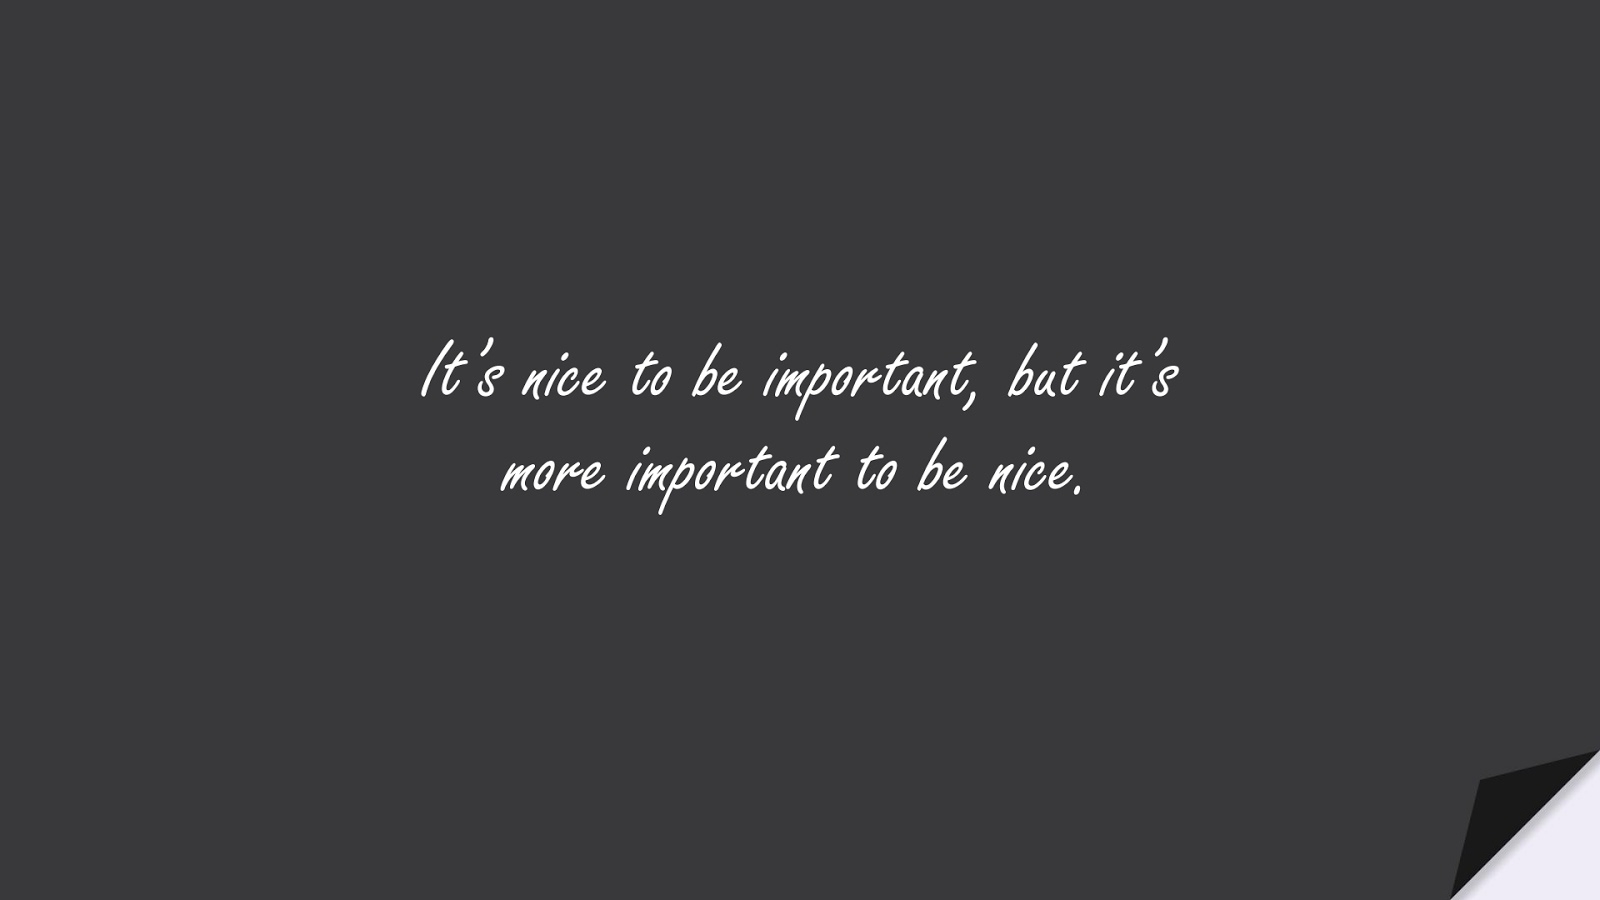 It’s nice to be important, but it’s more important to be nice.FALSE